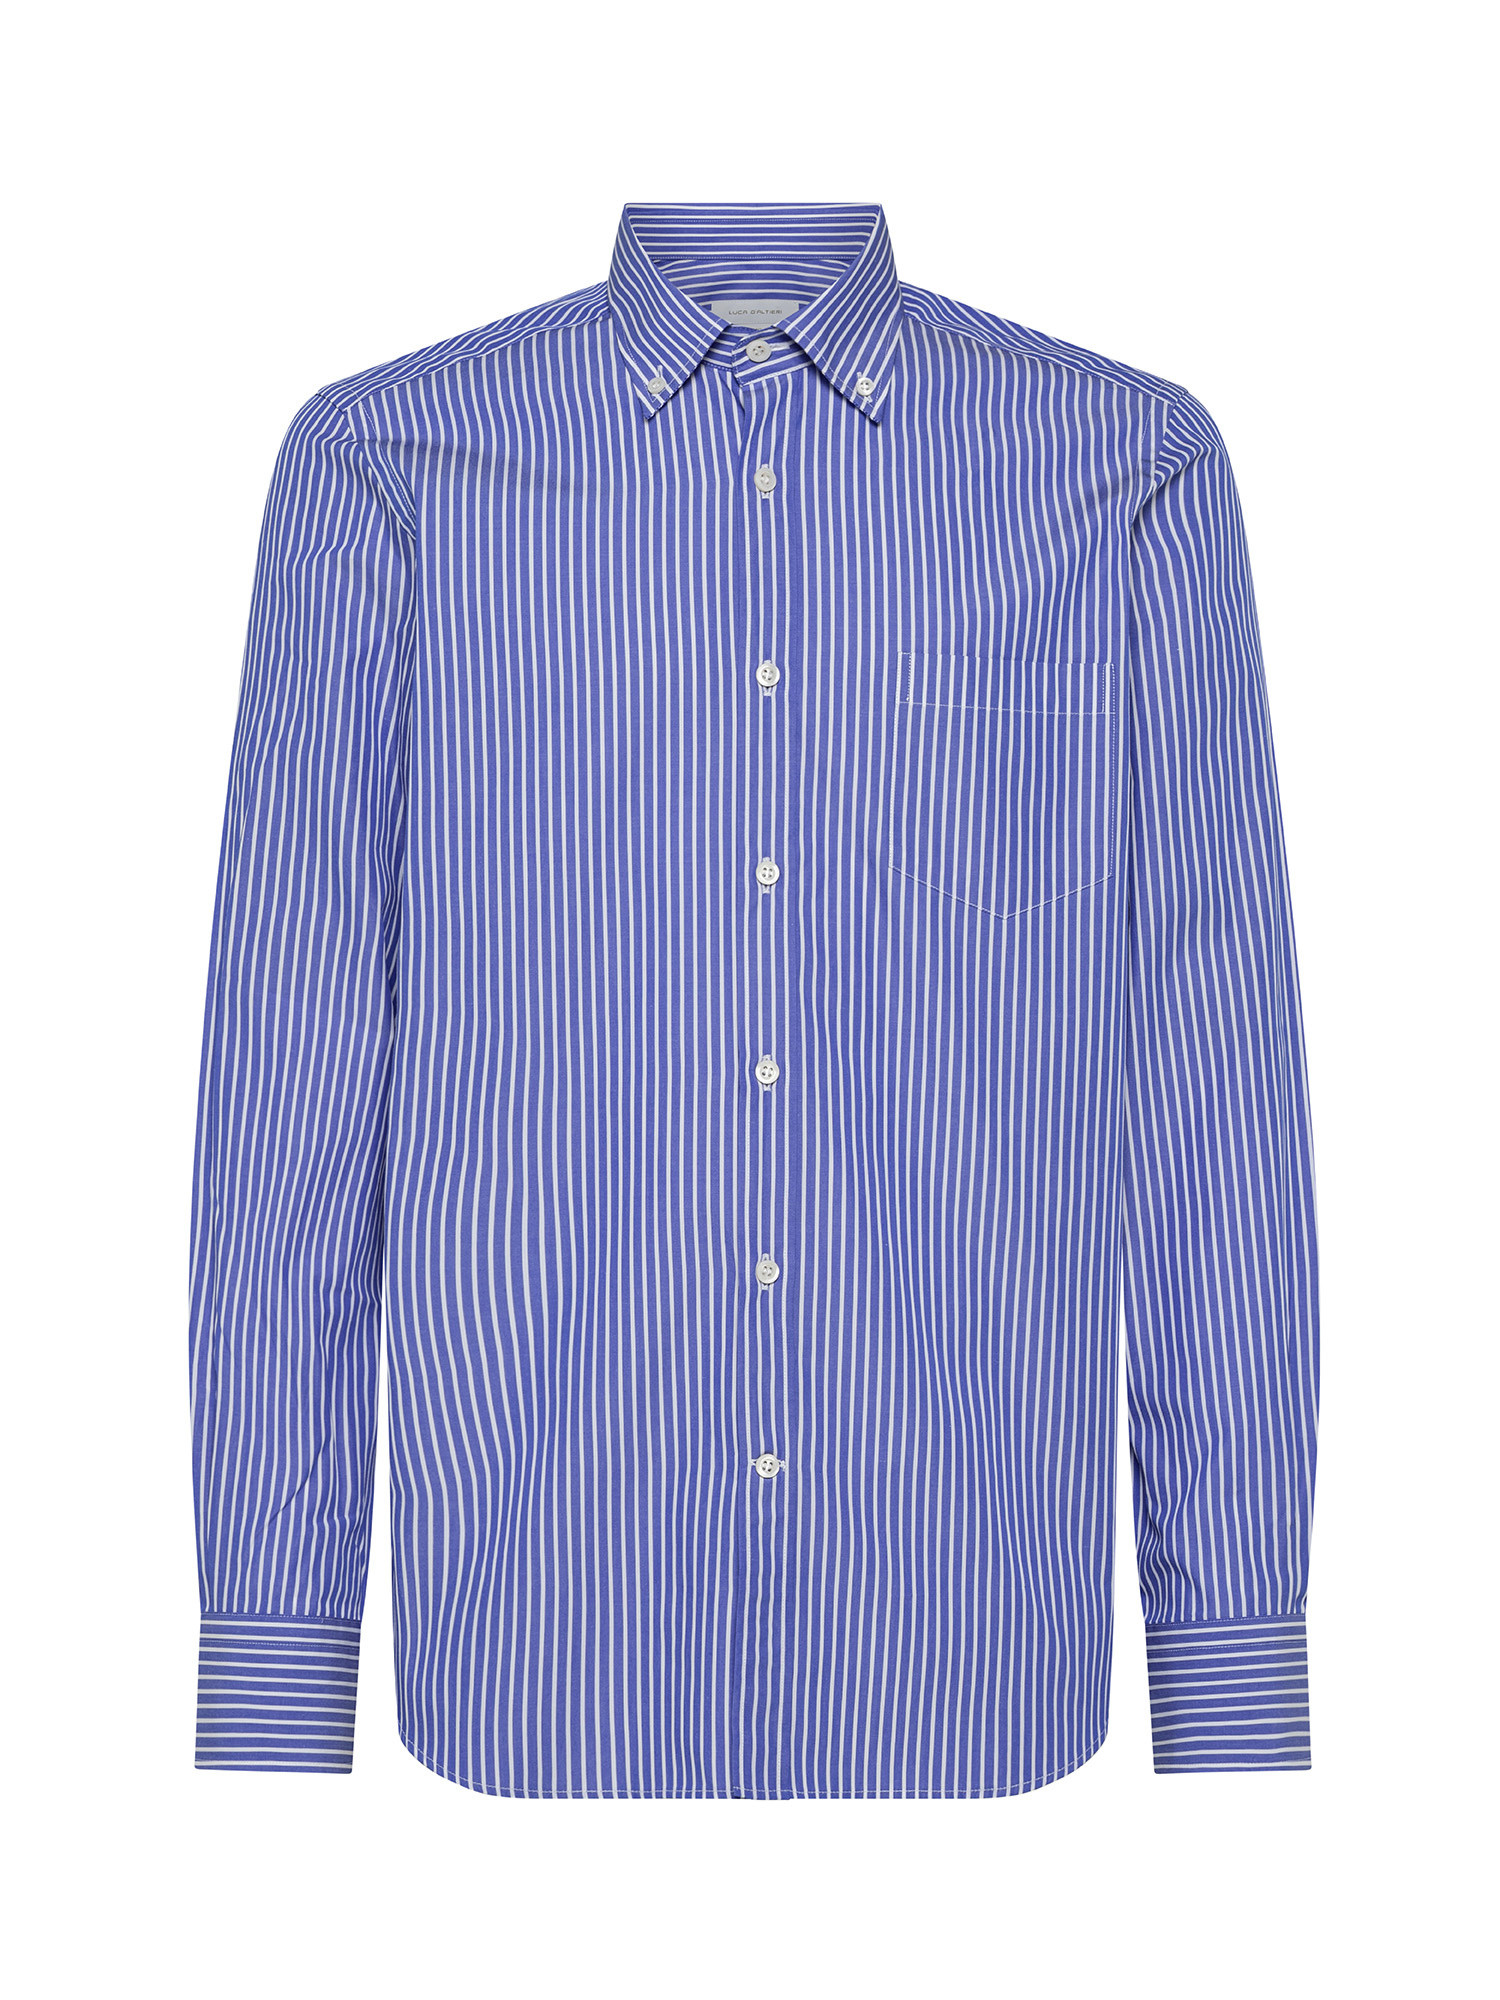 Slim fit shirt in pure cotton, Blue, large image number 1